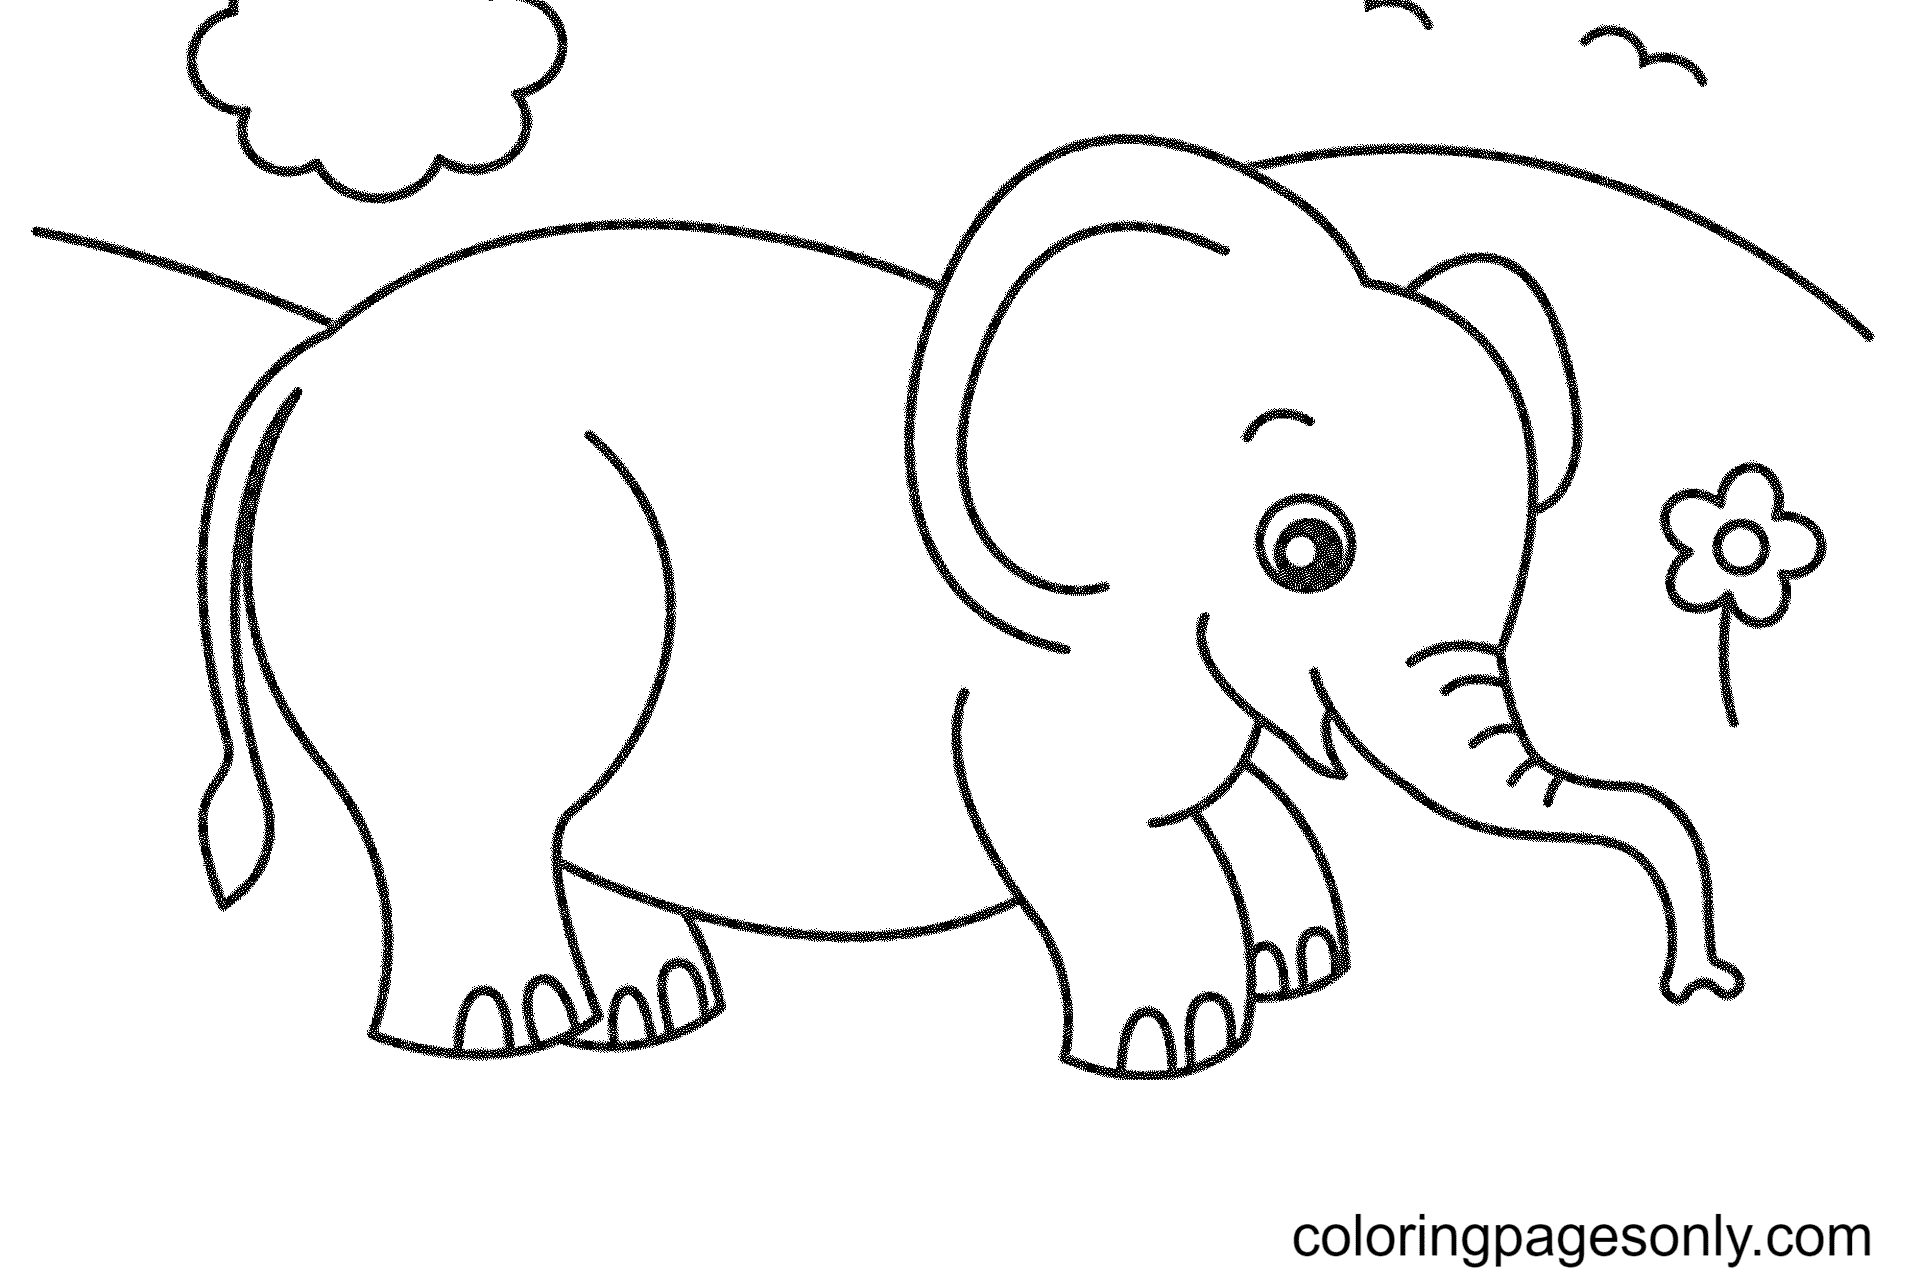 Elephant Animal Coloring Pages